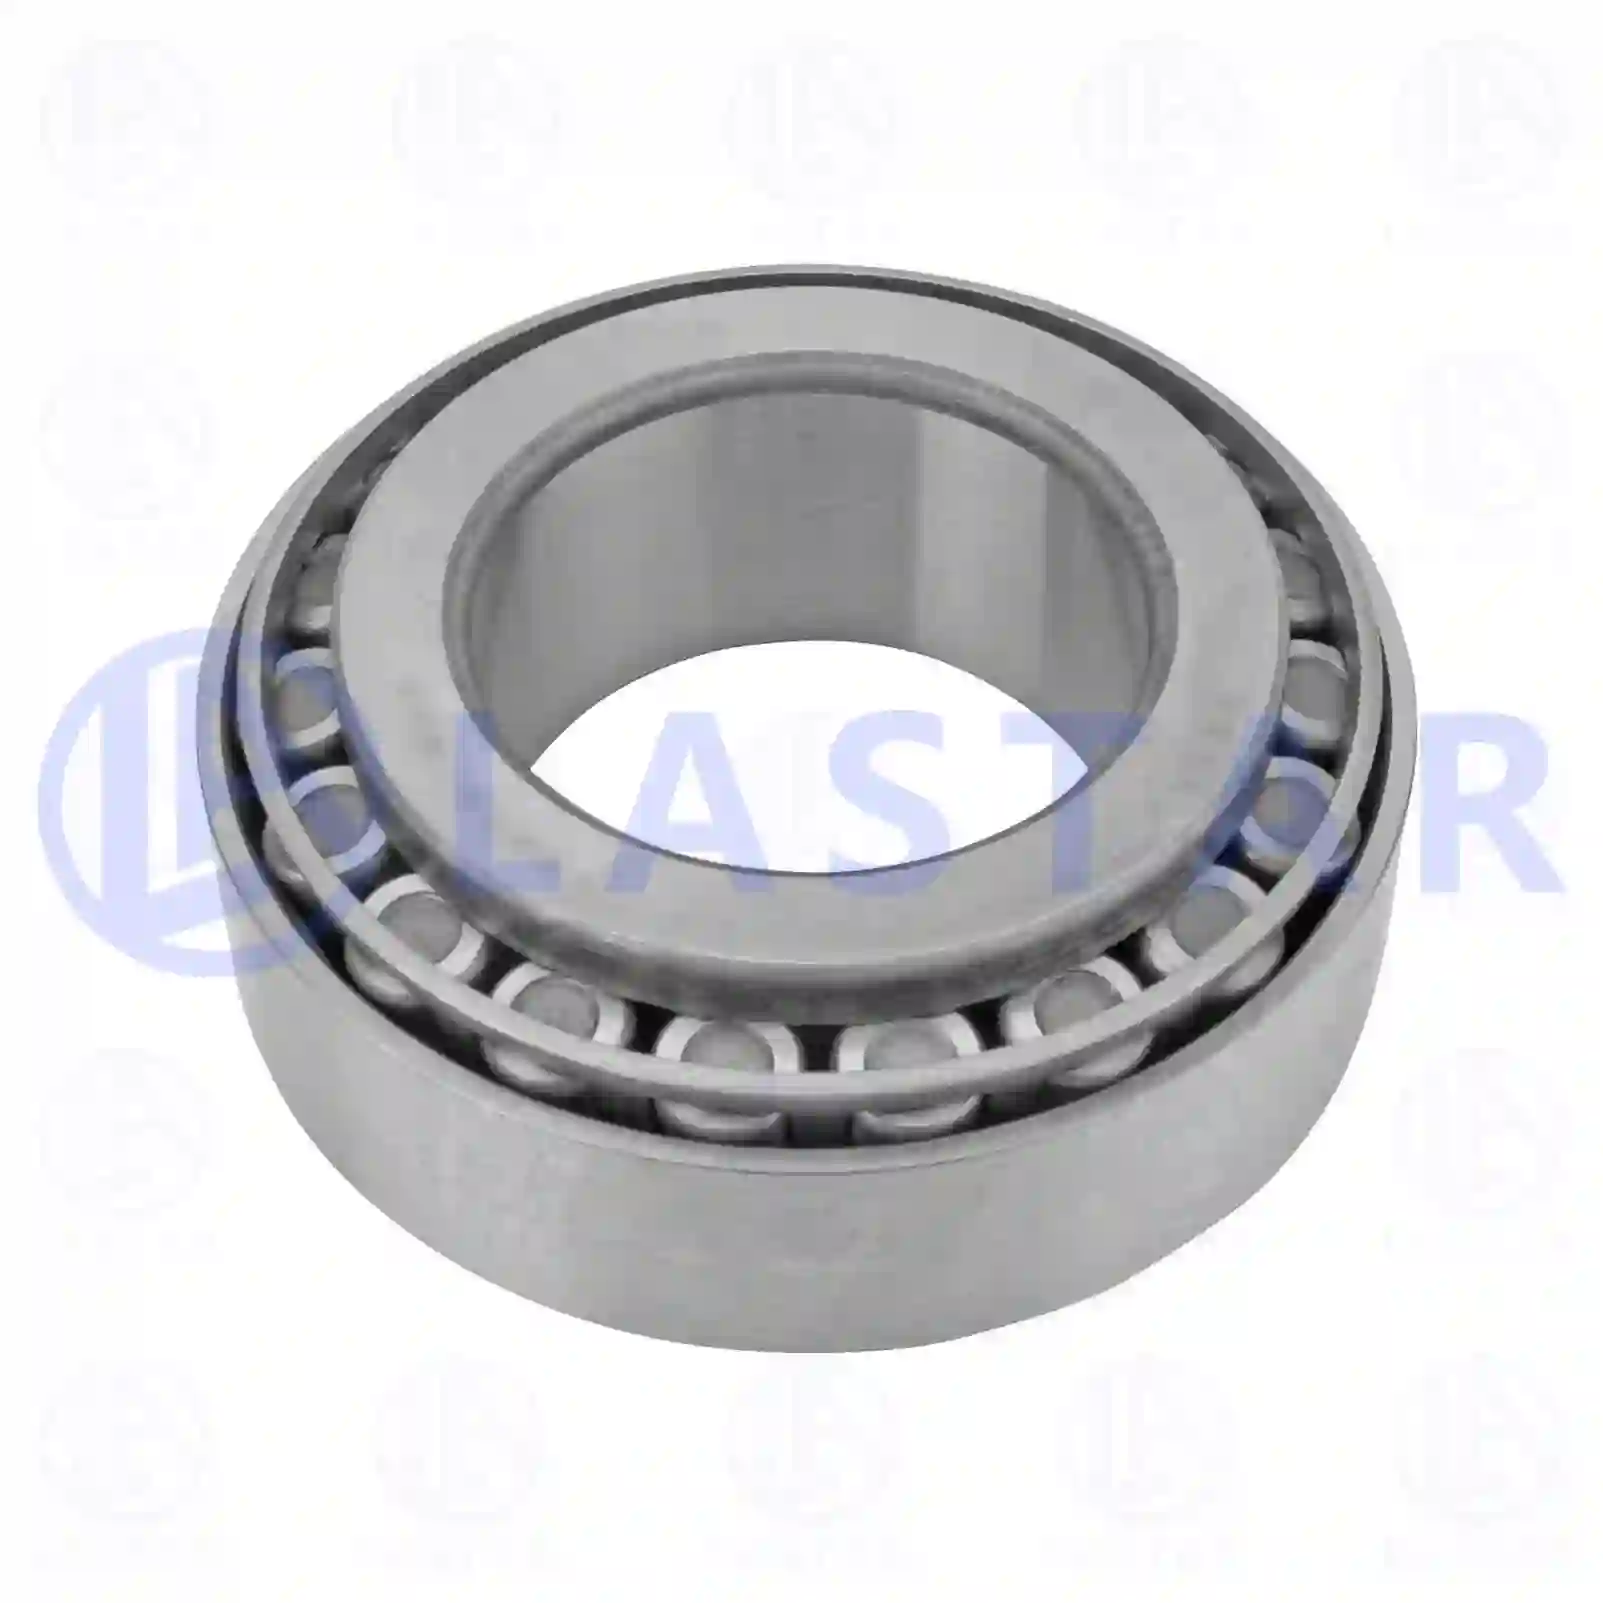 Gearbox Unit Tapered roller bearing, la no: 77732373 ,  oem no:07160361, 7160361, 06324890005, 06324890045, 06324890101, 06324890109, 81324890005, N1011014903, 0059812805, 0059814205, 0023336081, 7401652563, 4200006400, 345835, 1652563 Lastar Spare Part | Truck Spare Parts, Auotomotive Spare Parts